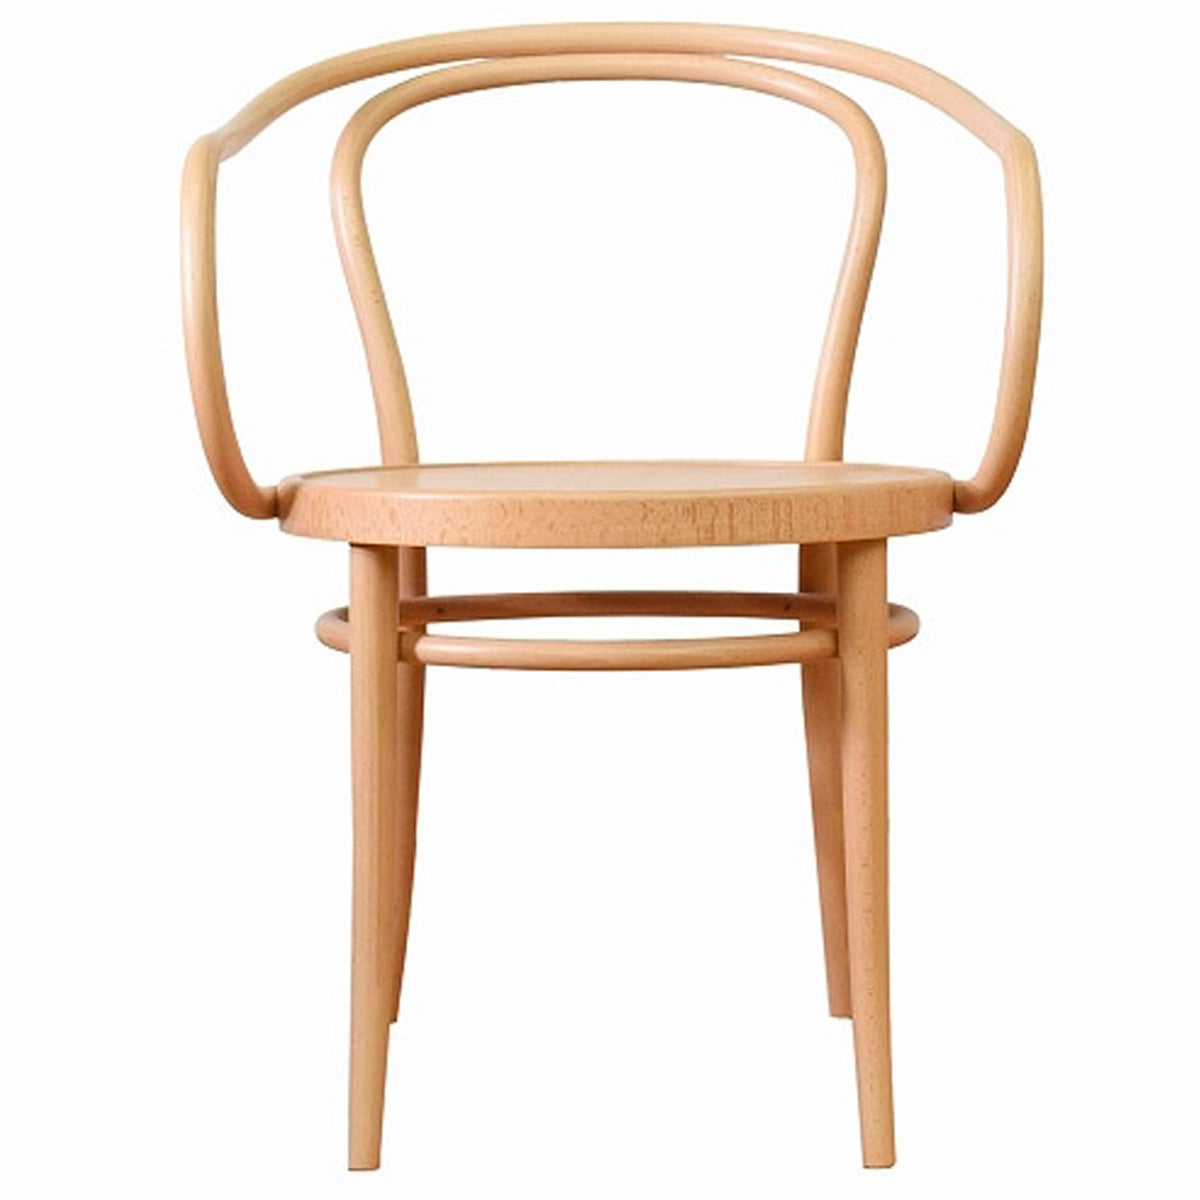 TON No.30 ARM Chair Natural LE Corbusier Corbusier Chair コルビジェチェア